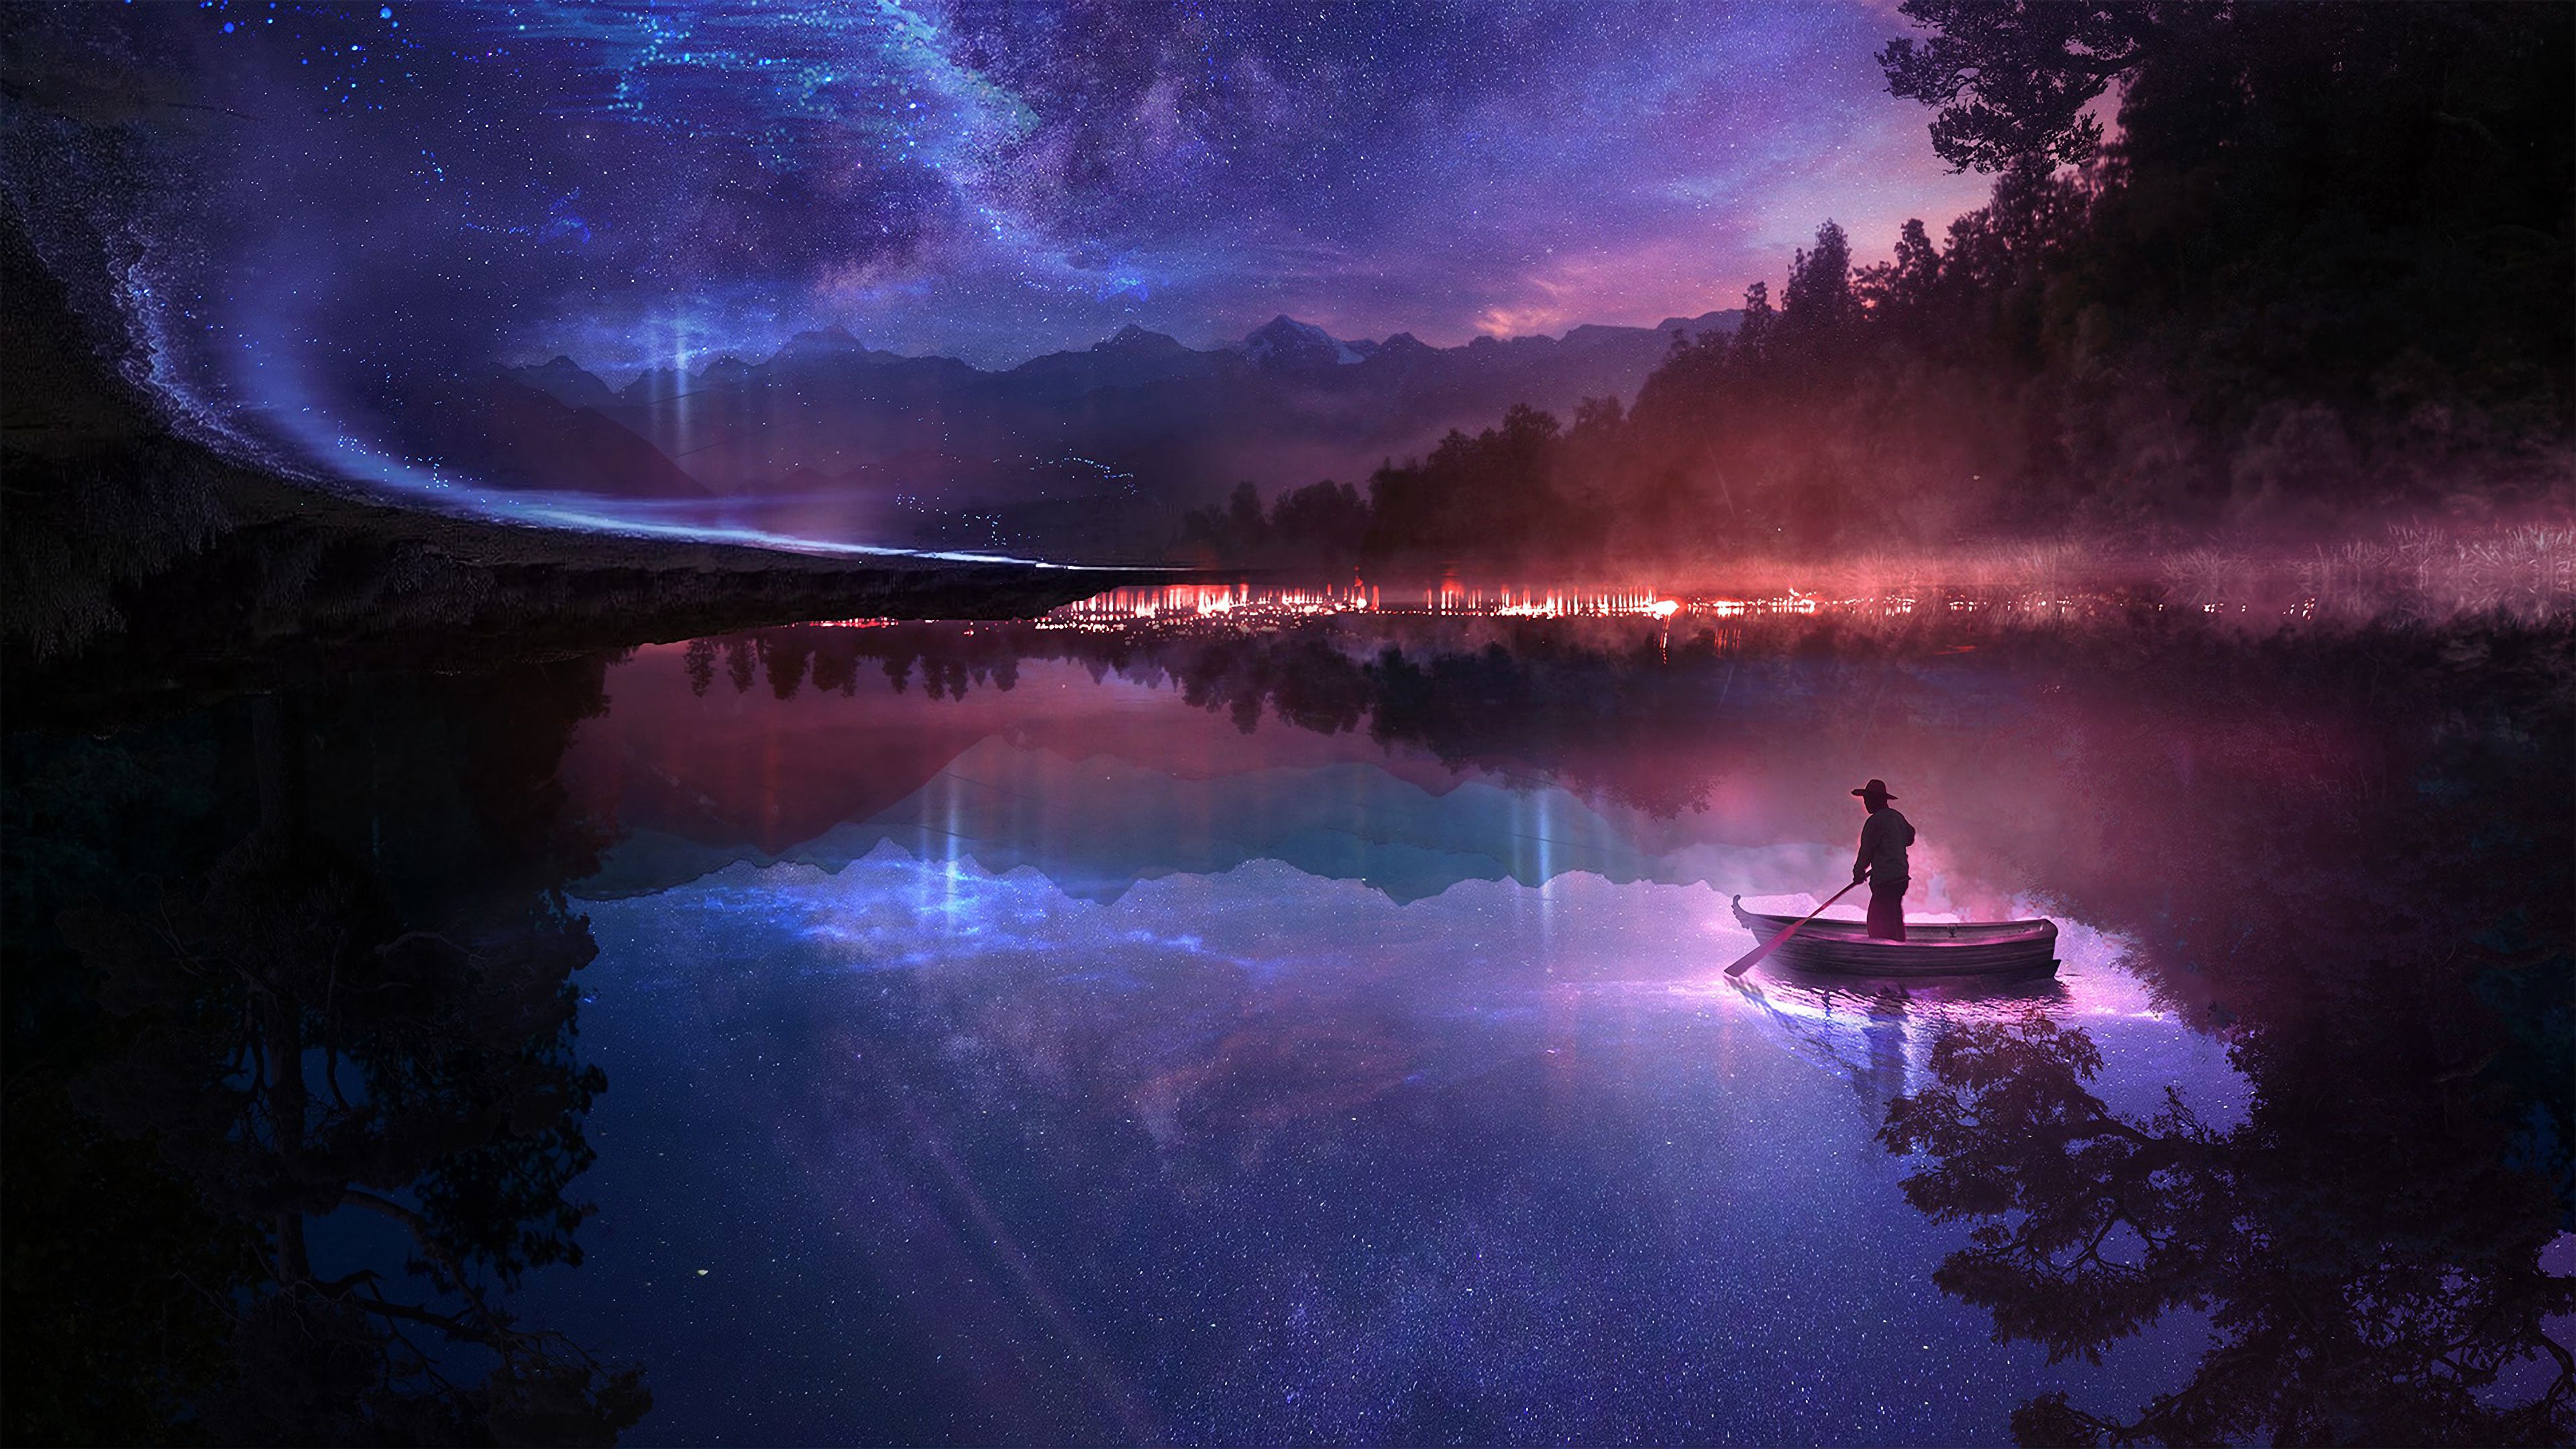 137419 download wallpaper loneliness, rivers, art, night, boat screensavers and pictures for free